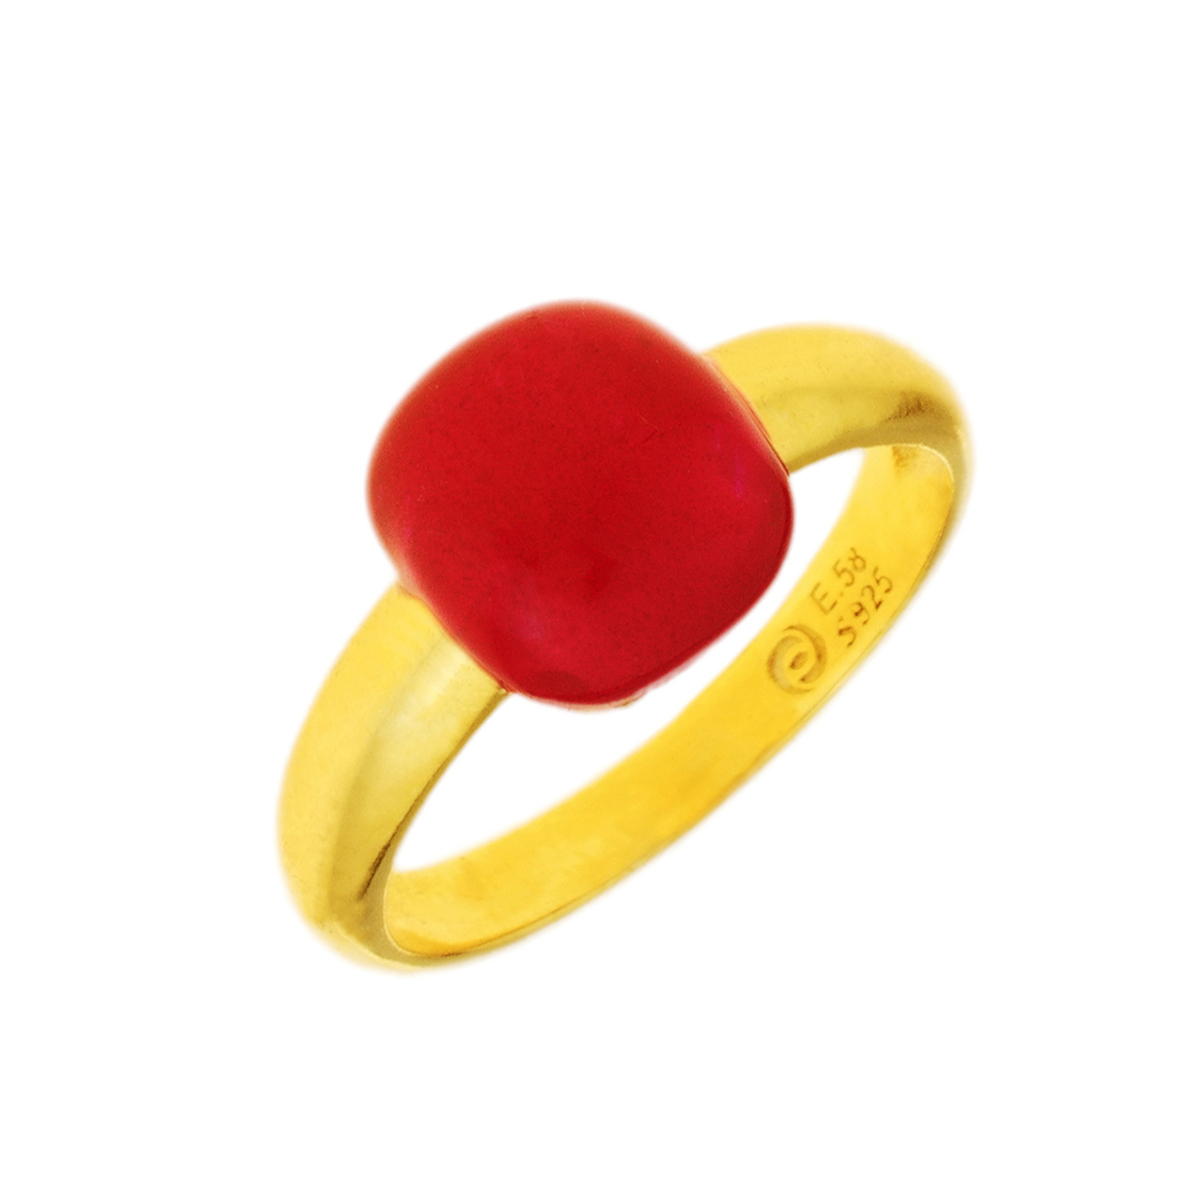 GREGIO Ring with Red Enamel - Silver 925 and Gold Plated